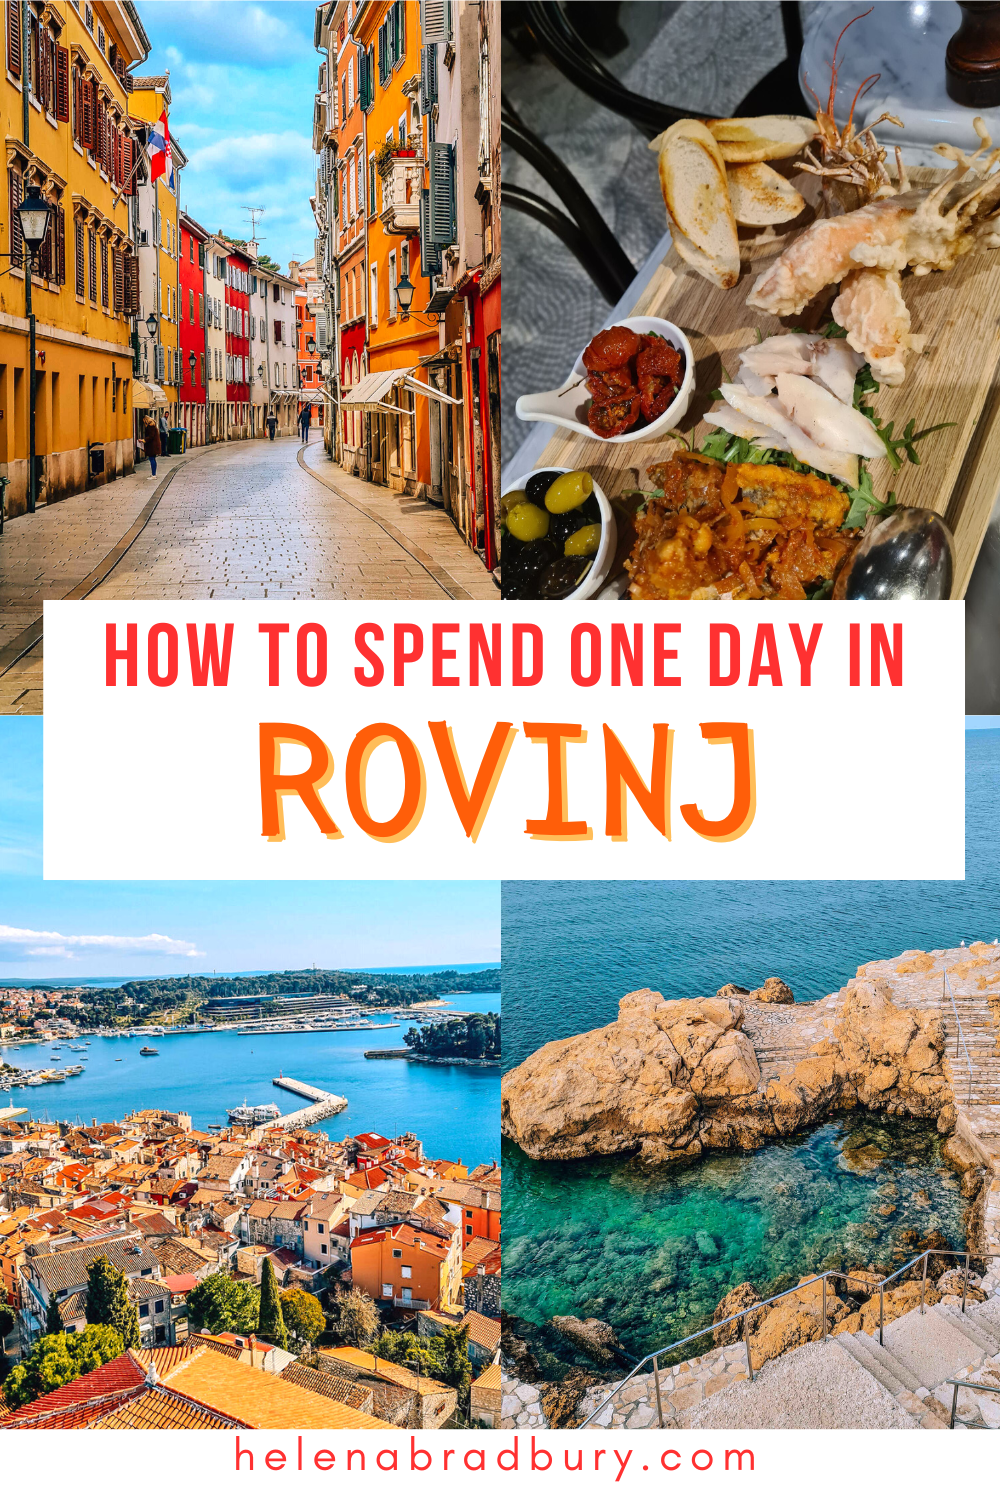 Colourful Venetian streets, a beautiful old town, boat trips, Istrian cuisine, cycling routes, dolphin spotting and more. Make the most of your one day in Rovinj, Croatia with this Rovinj itinerary! | rovinj croatia one day | 1 day in rovinj | rovinj